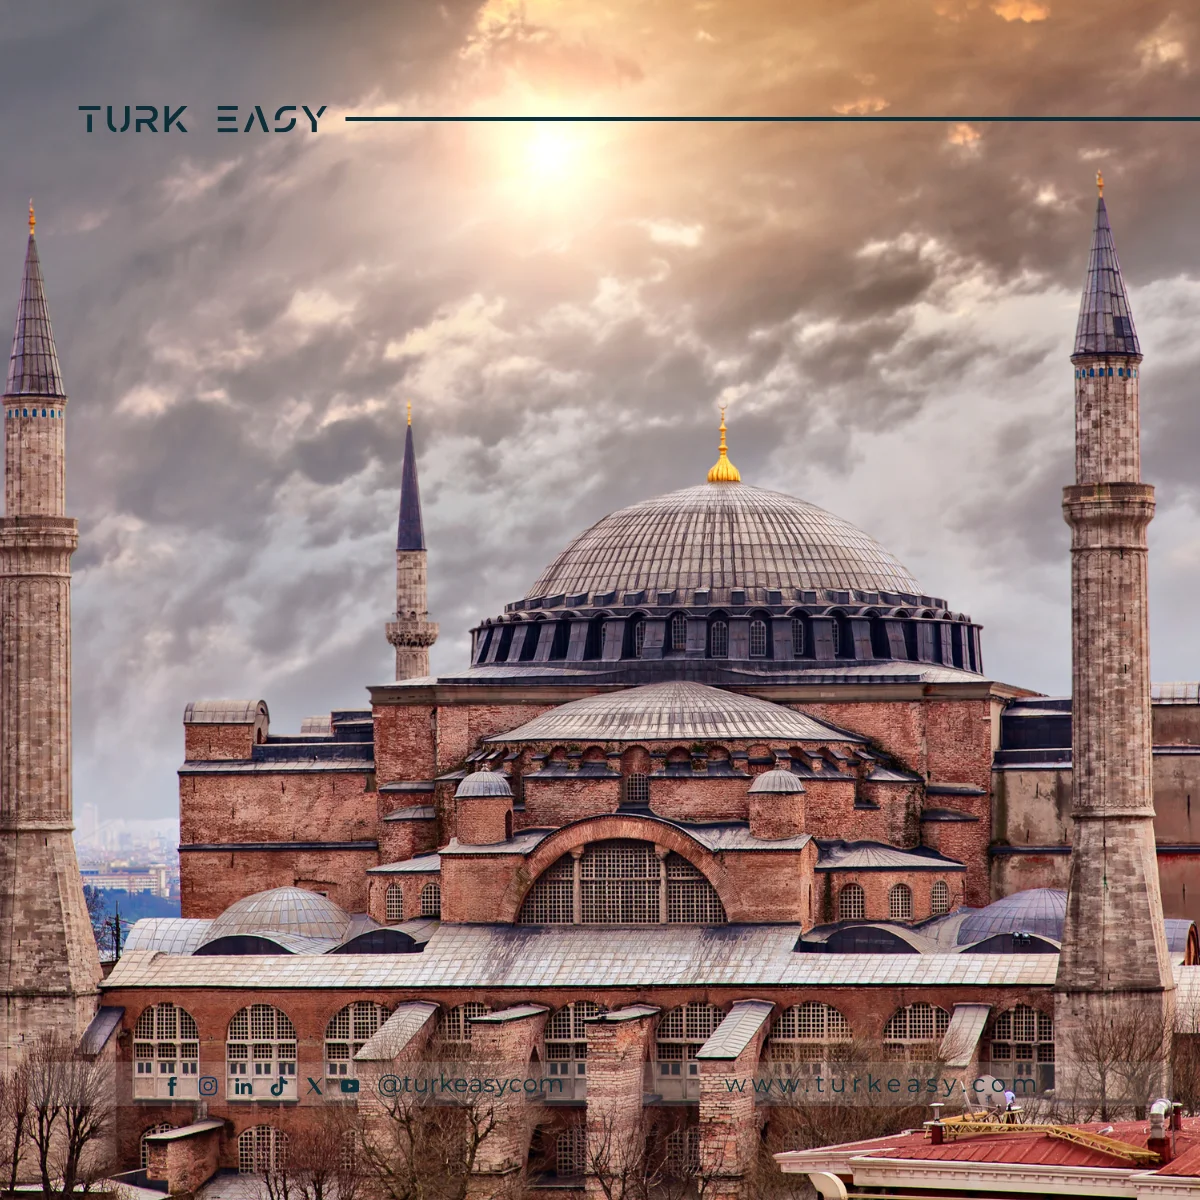 guide/details-about-ayasofya-mosque-in-istanbul.webp